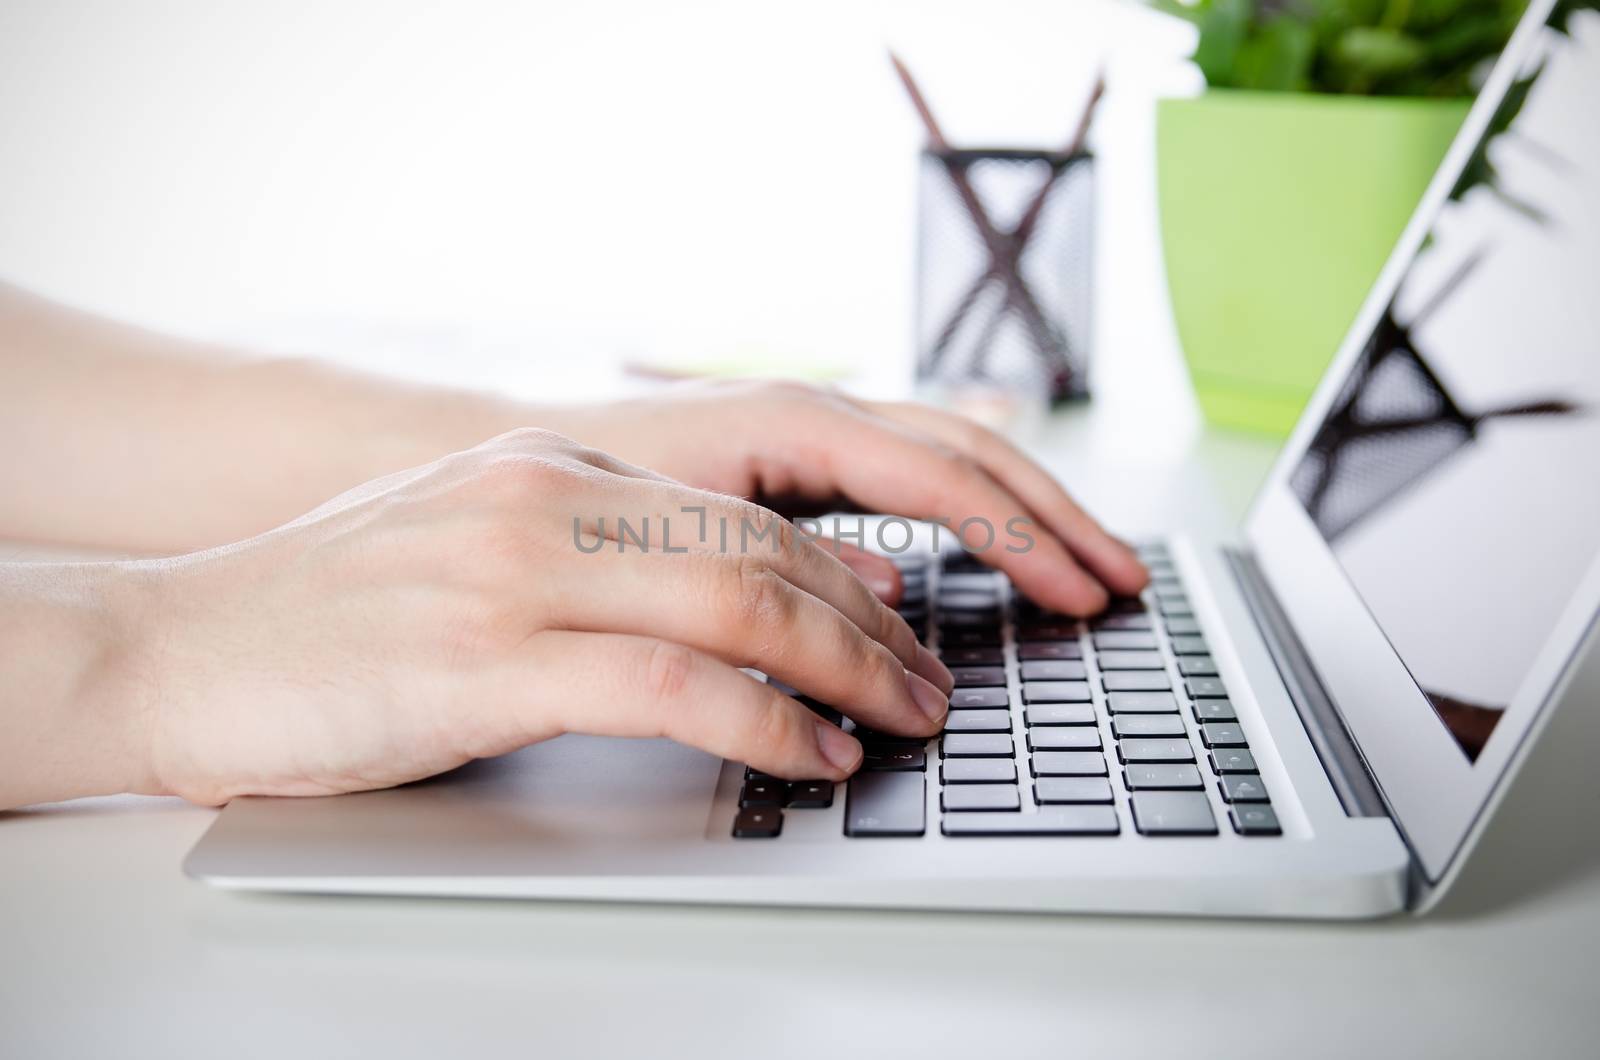 Man working with modern laptop in office. Hands typing on keyboard